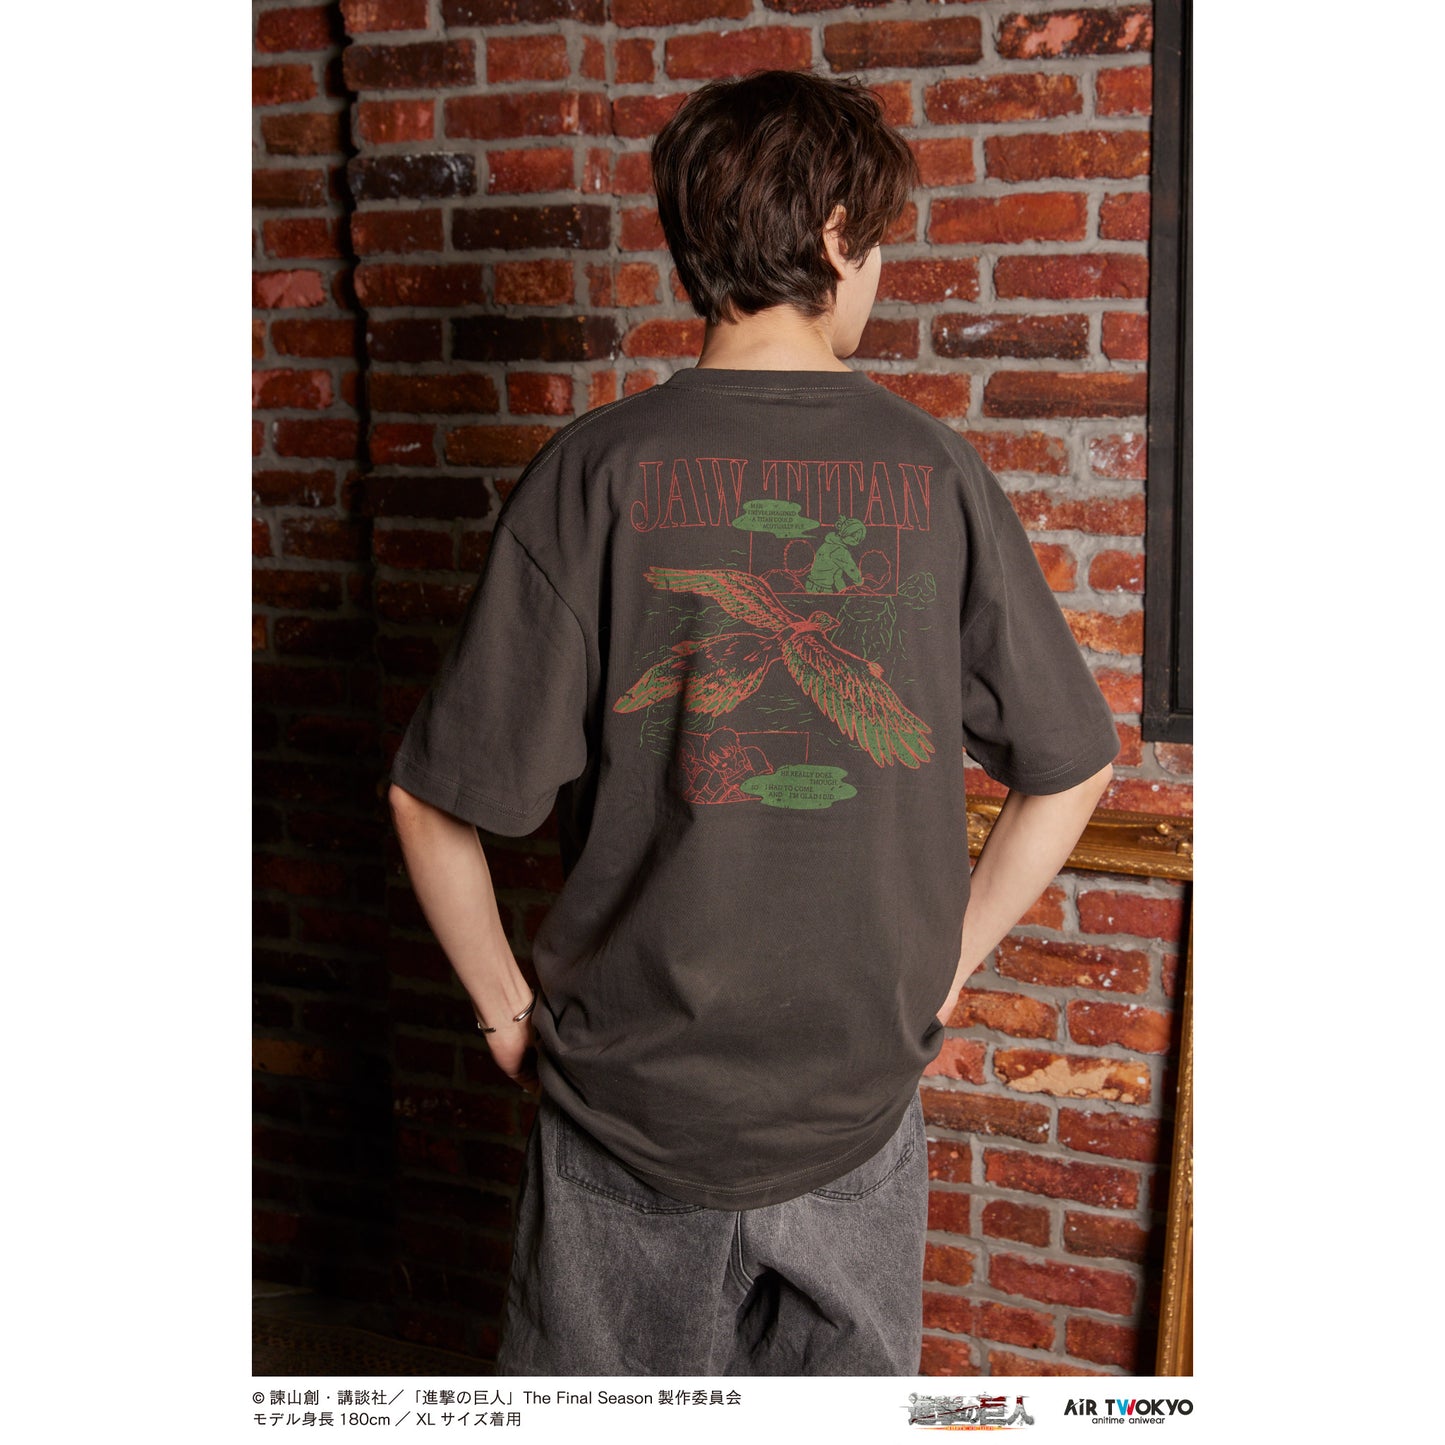 “Attack on Titan” The Final Season THE FINAL CHAPTERS Illustration T-shirt 1 (BRING IT ON!! I’M STRONG!!)